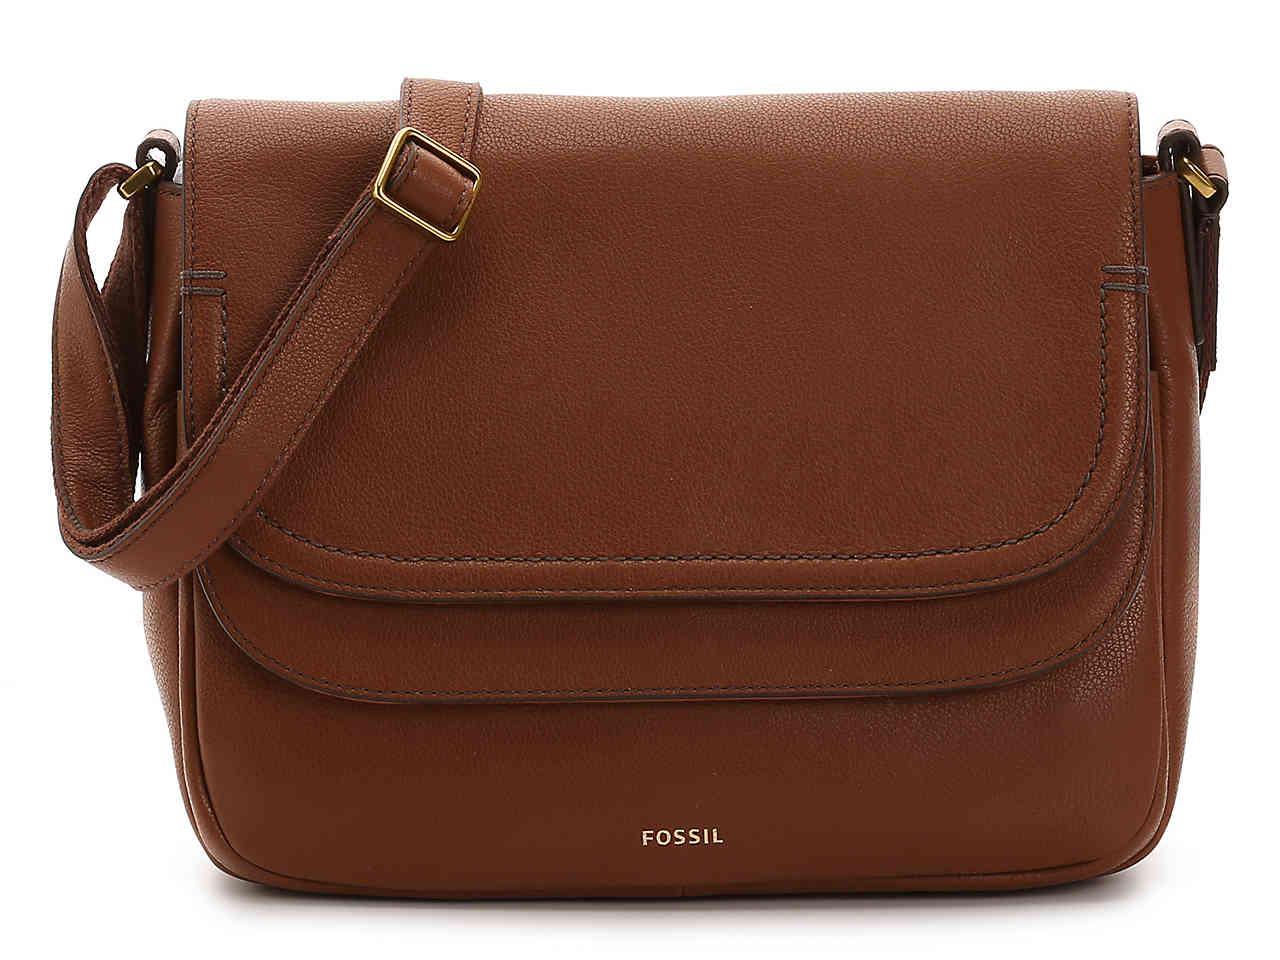 Fossil Peyton Leather Crossbody Bag in Brown - Lyst